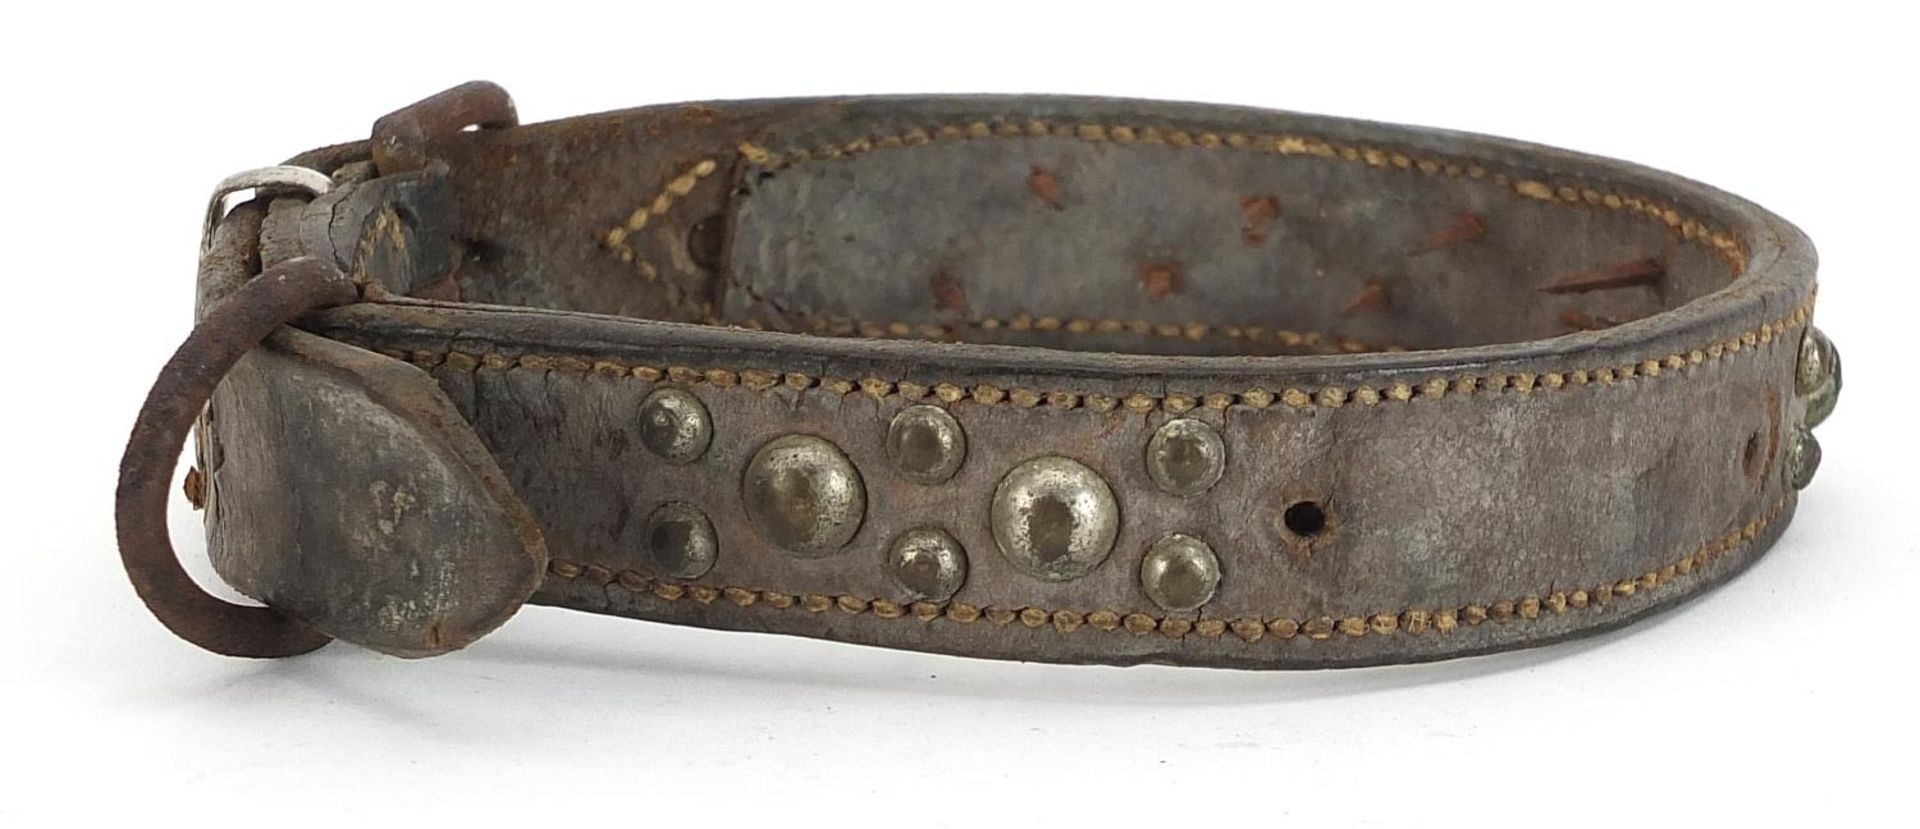 19th century spiked leather dog's collar - Image 2 of 3